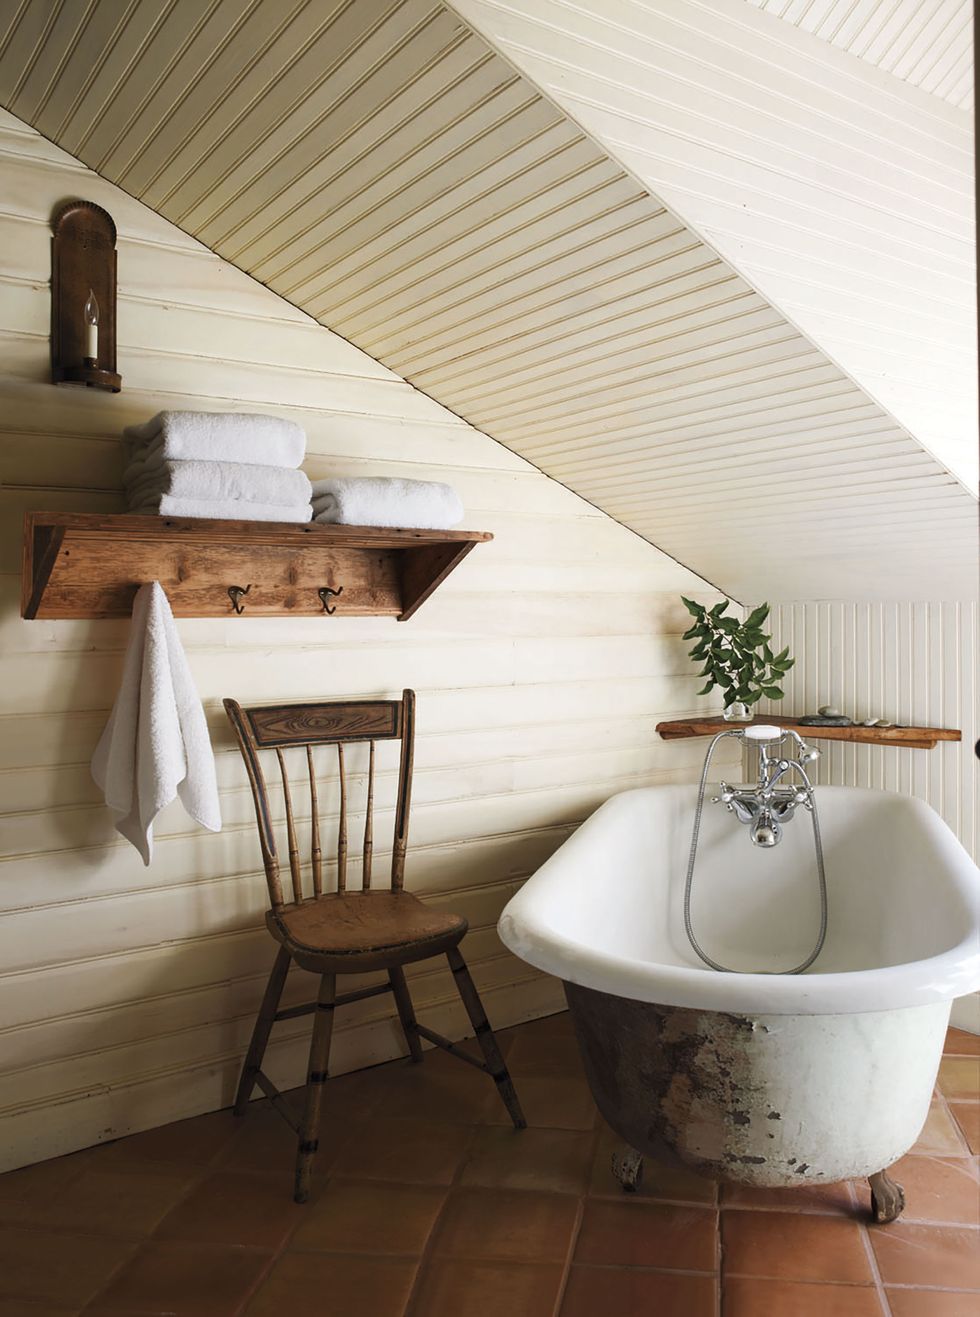 old white standalong tub under an eaved room with tongue and groove paneling and a simple wood shelf and chair